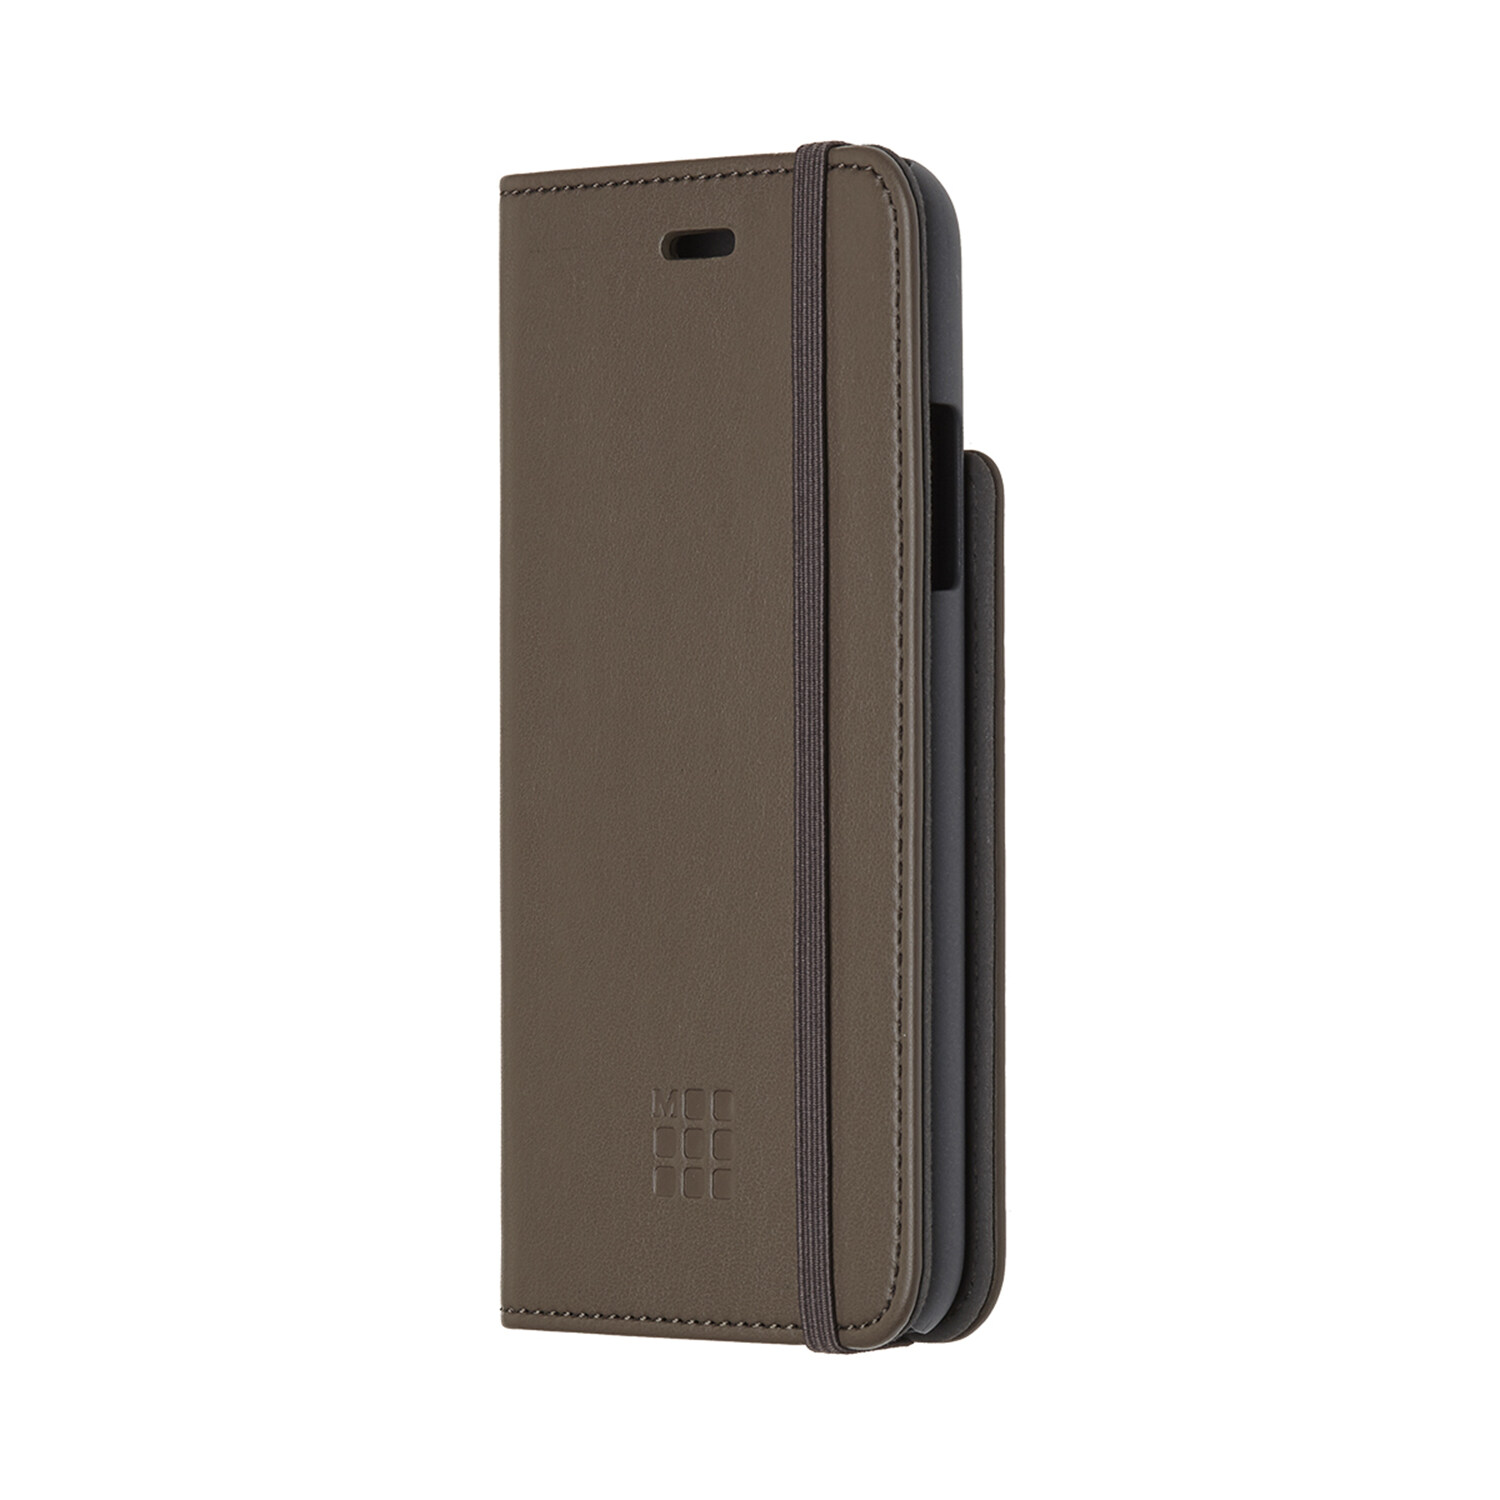 Moleskine Case Booktype, iPhone X, Earth Brown (Other)